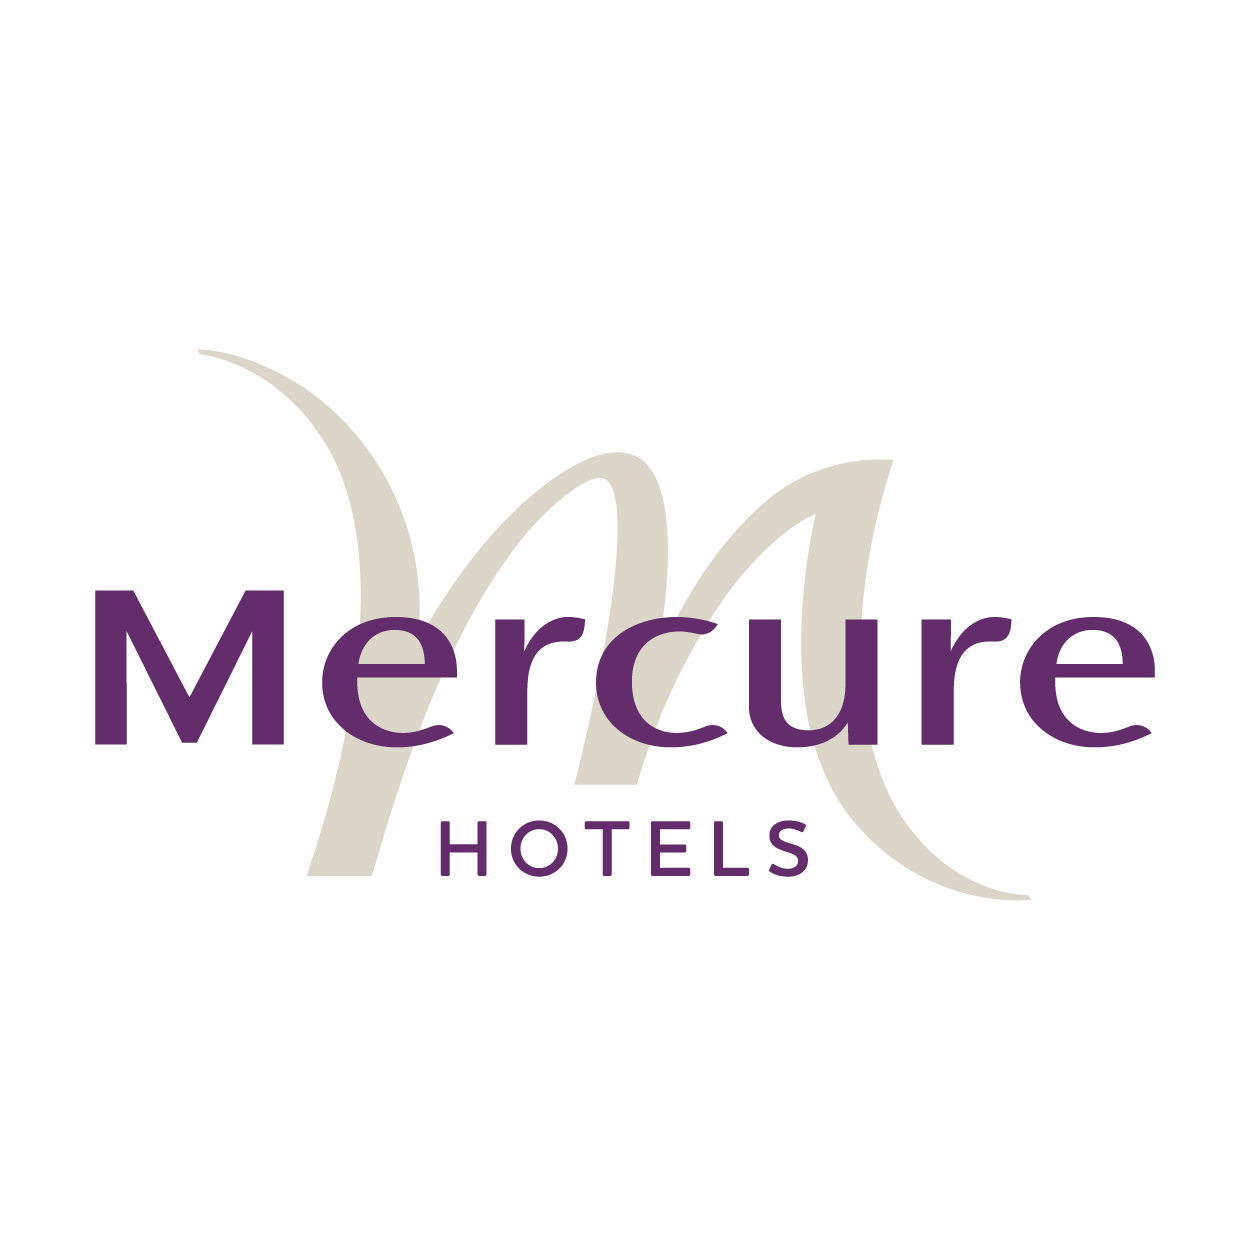 cliente-Outro Mercados-Mercure Hotels.png